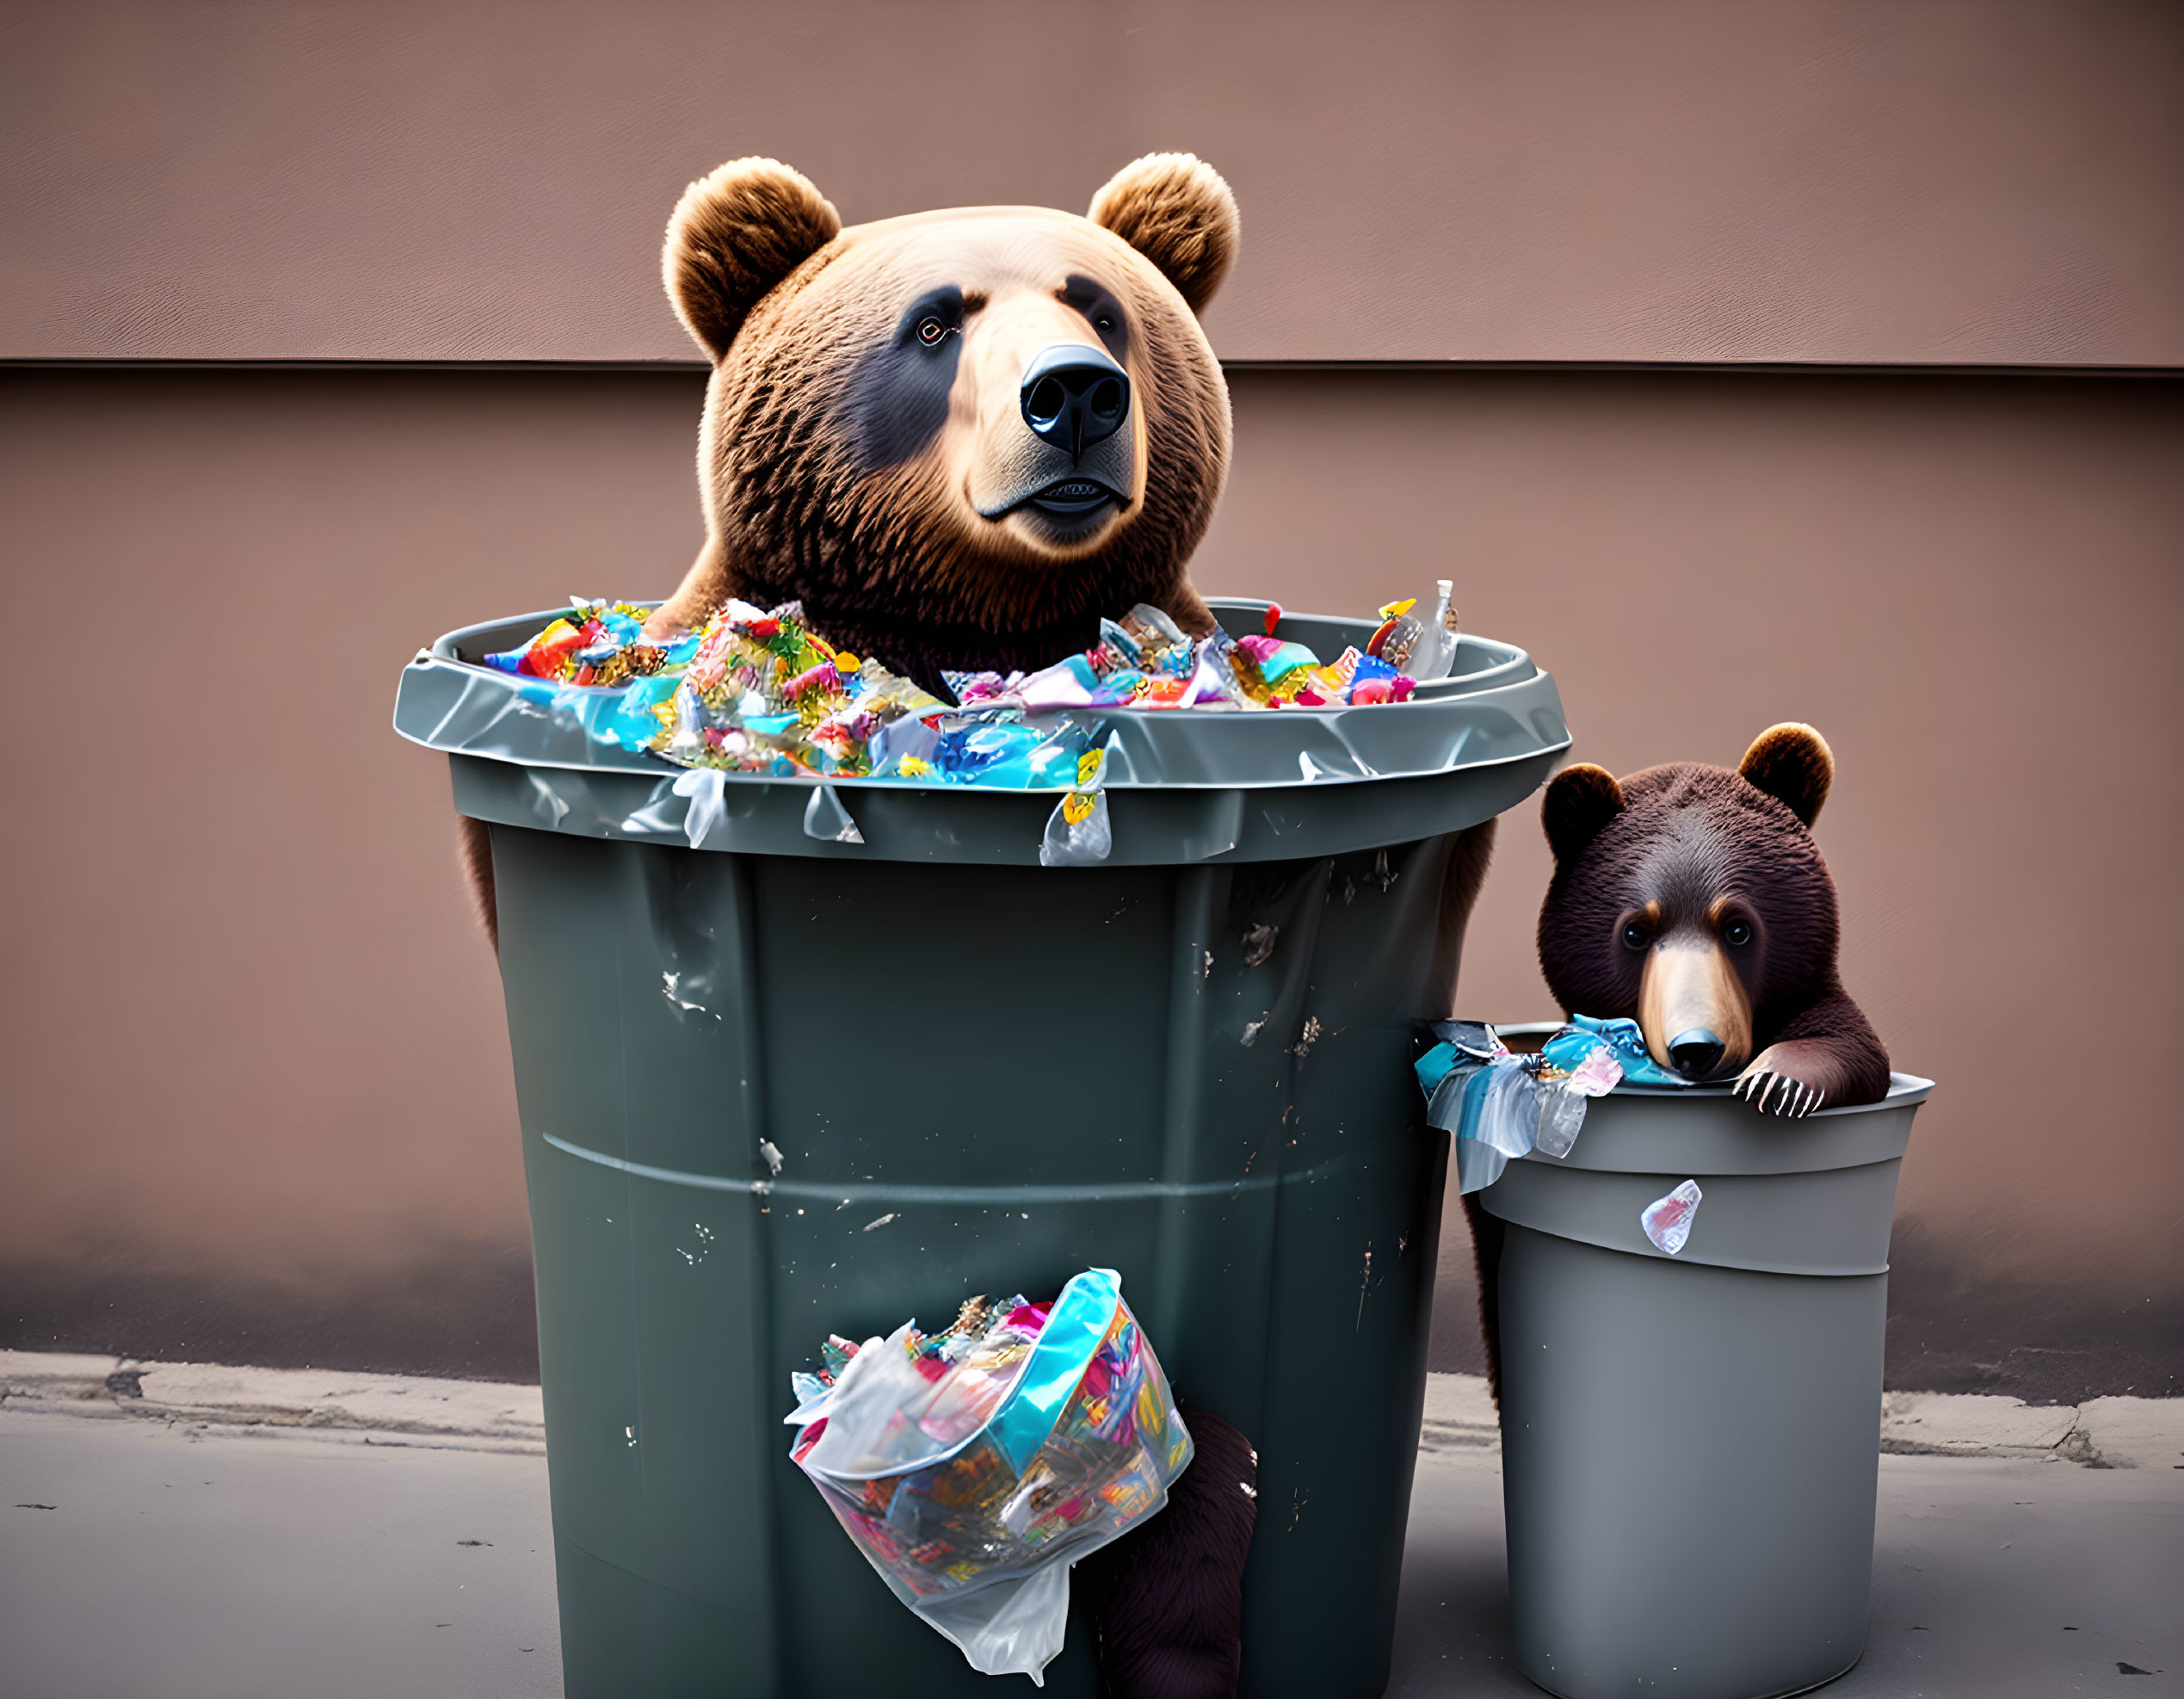 Realistic bear figures with overflowing candy wrappers.